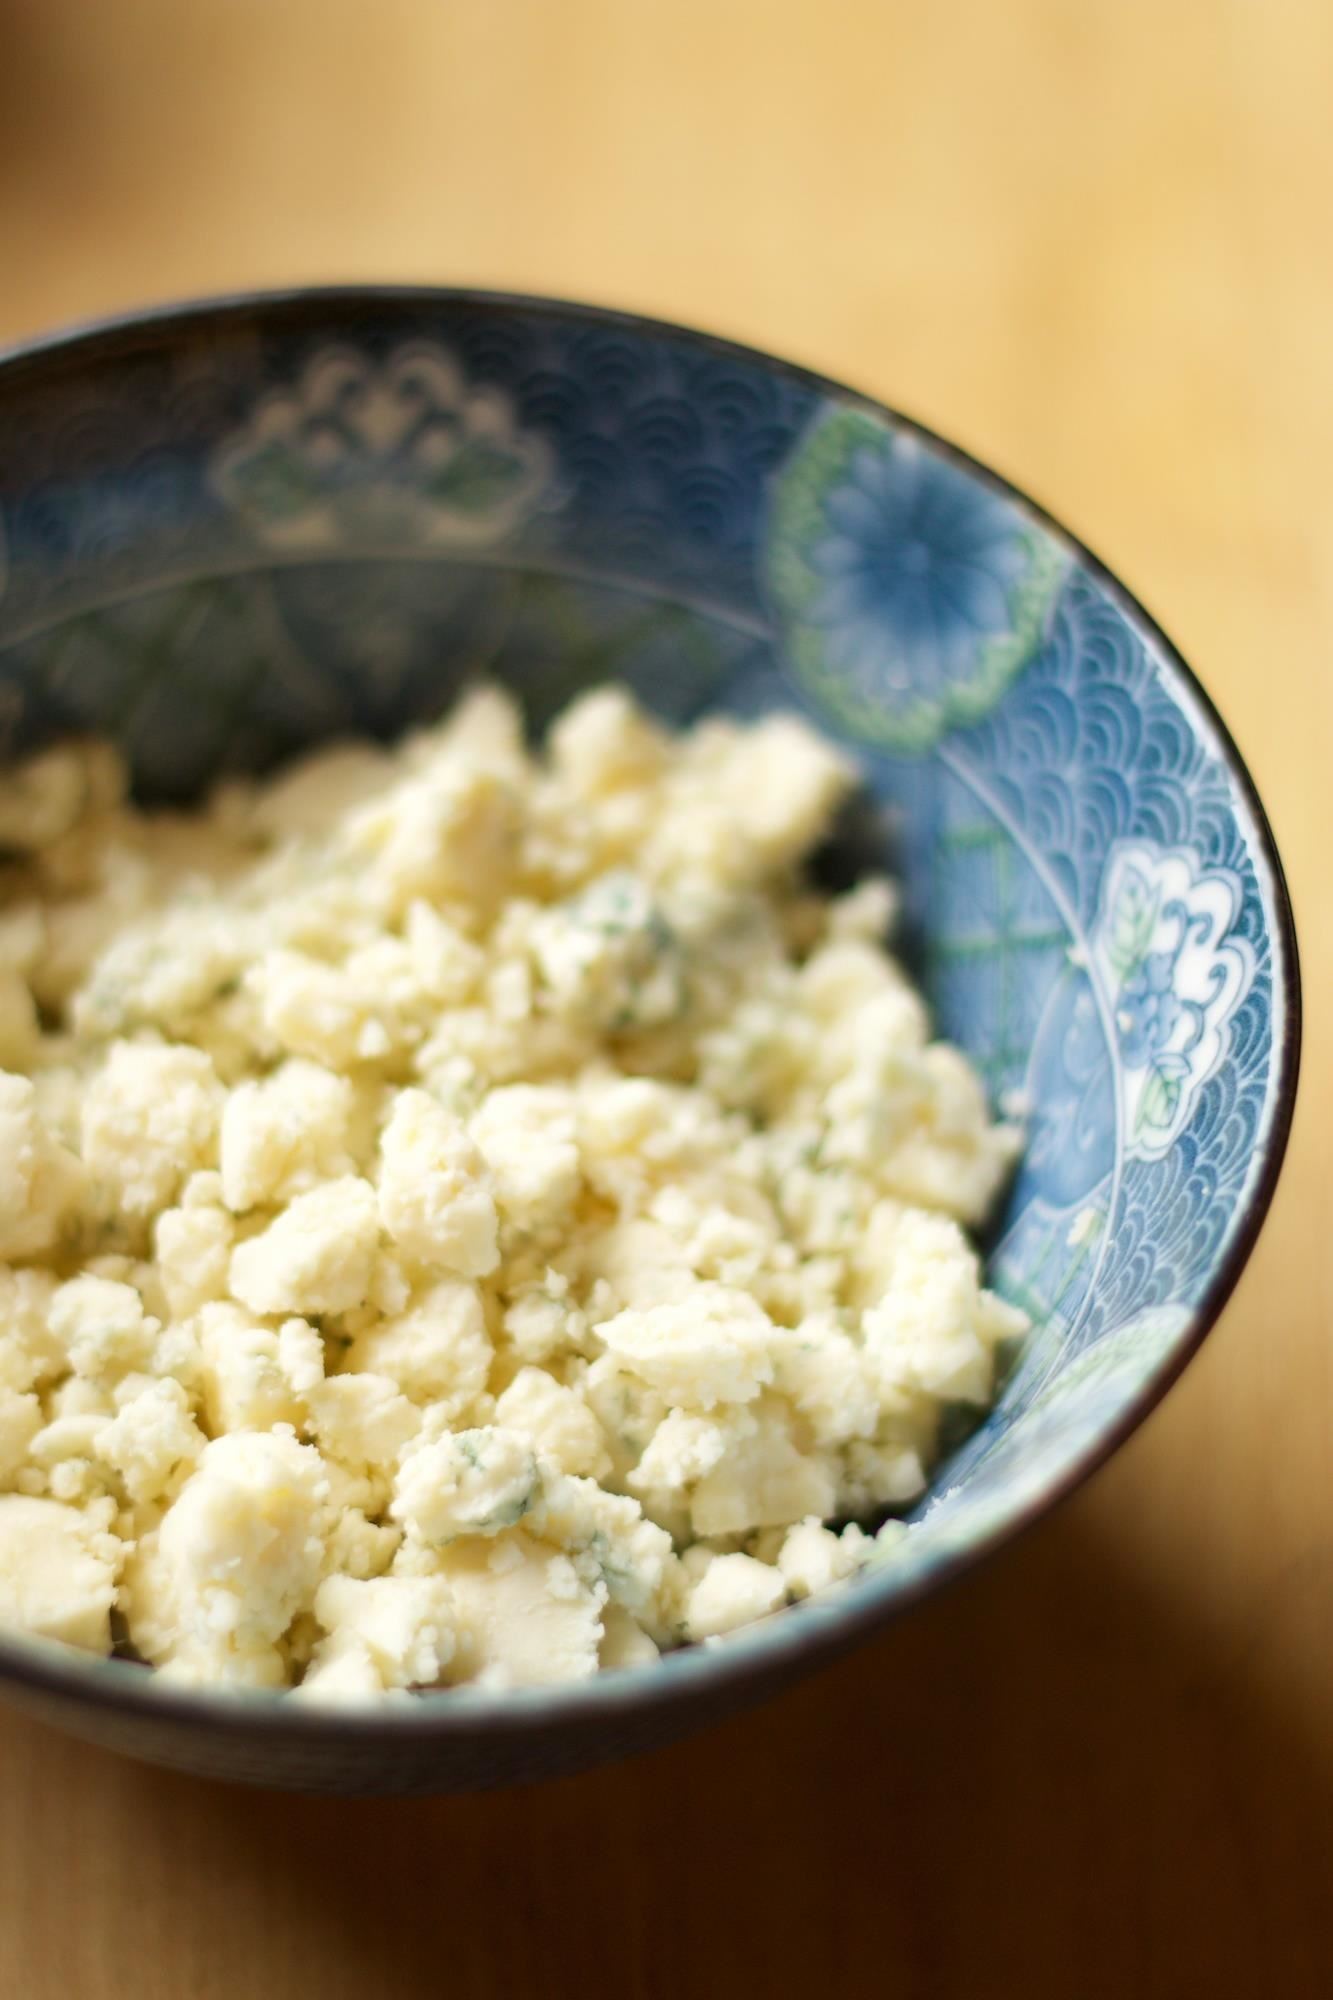 5 Ingredients That'll Take Your Potato Salad to the Next Level